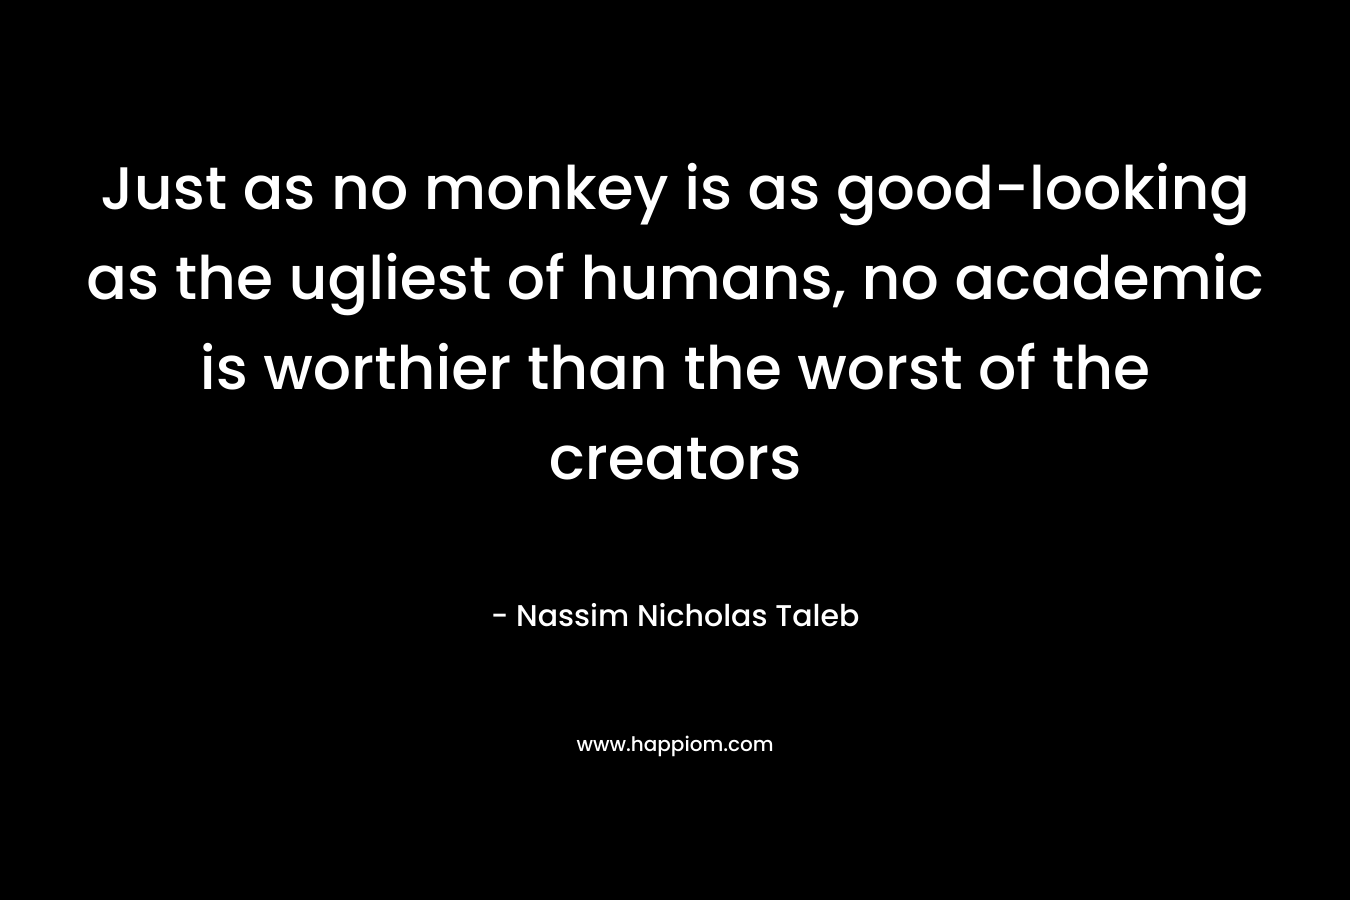 Just as no monkey is as good-looking as the ugliest of humans, no academic is worthier than the worst of the creators – Nassim Nicholas Taleb